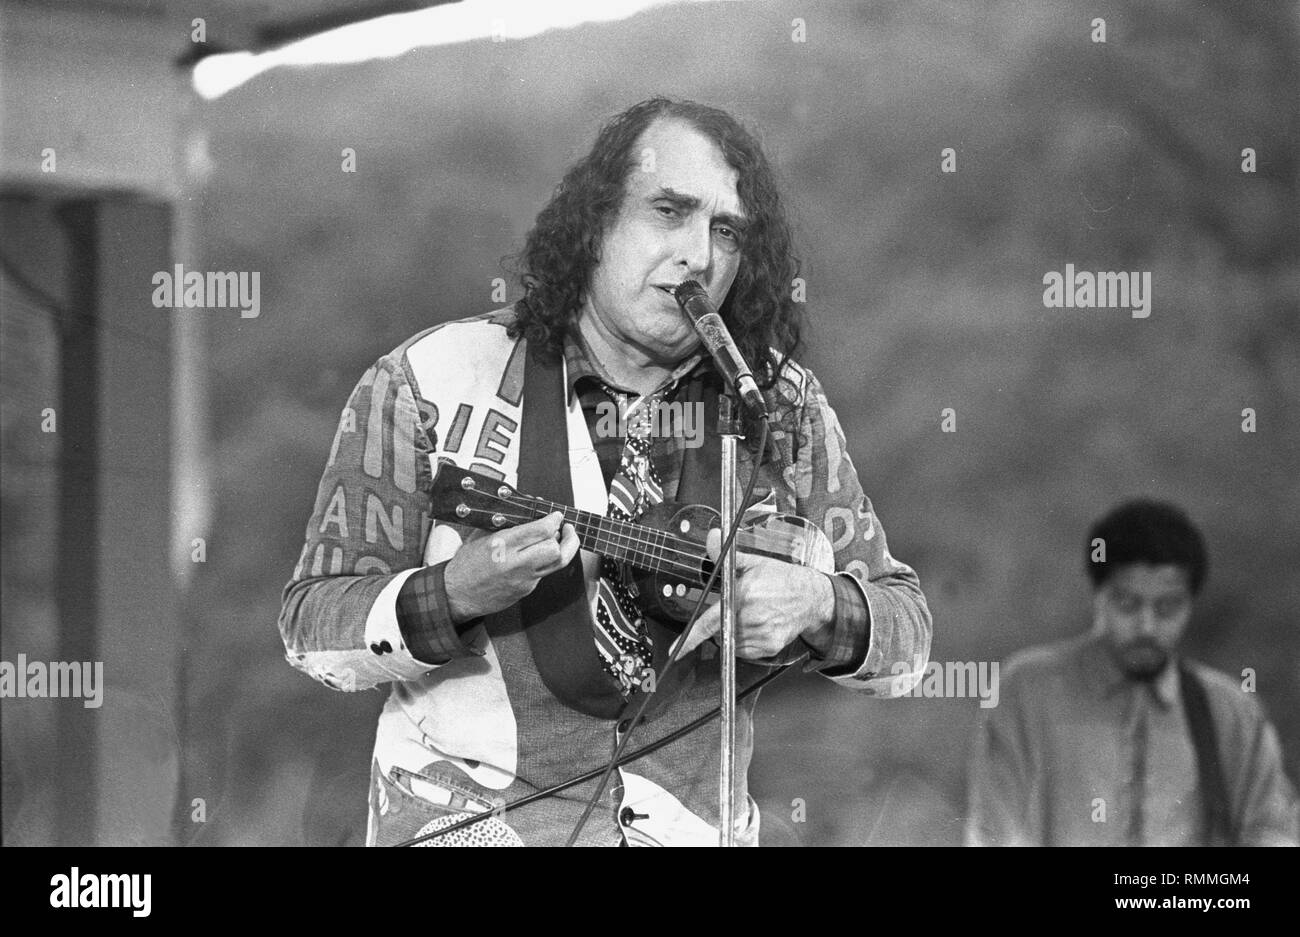 Singer, ukulele player, and musical archivist, Herbert Khaury, better known by the stage name Tiny Tim, is shown performing on stage during a 'live' concert appearance. Stock Photo